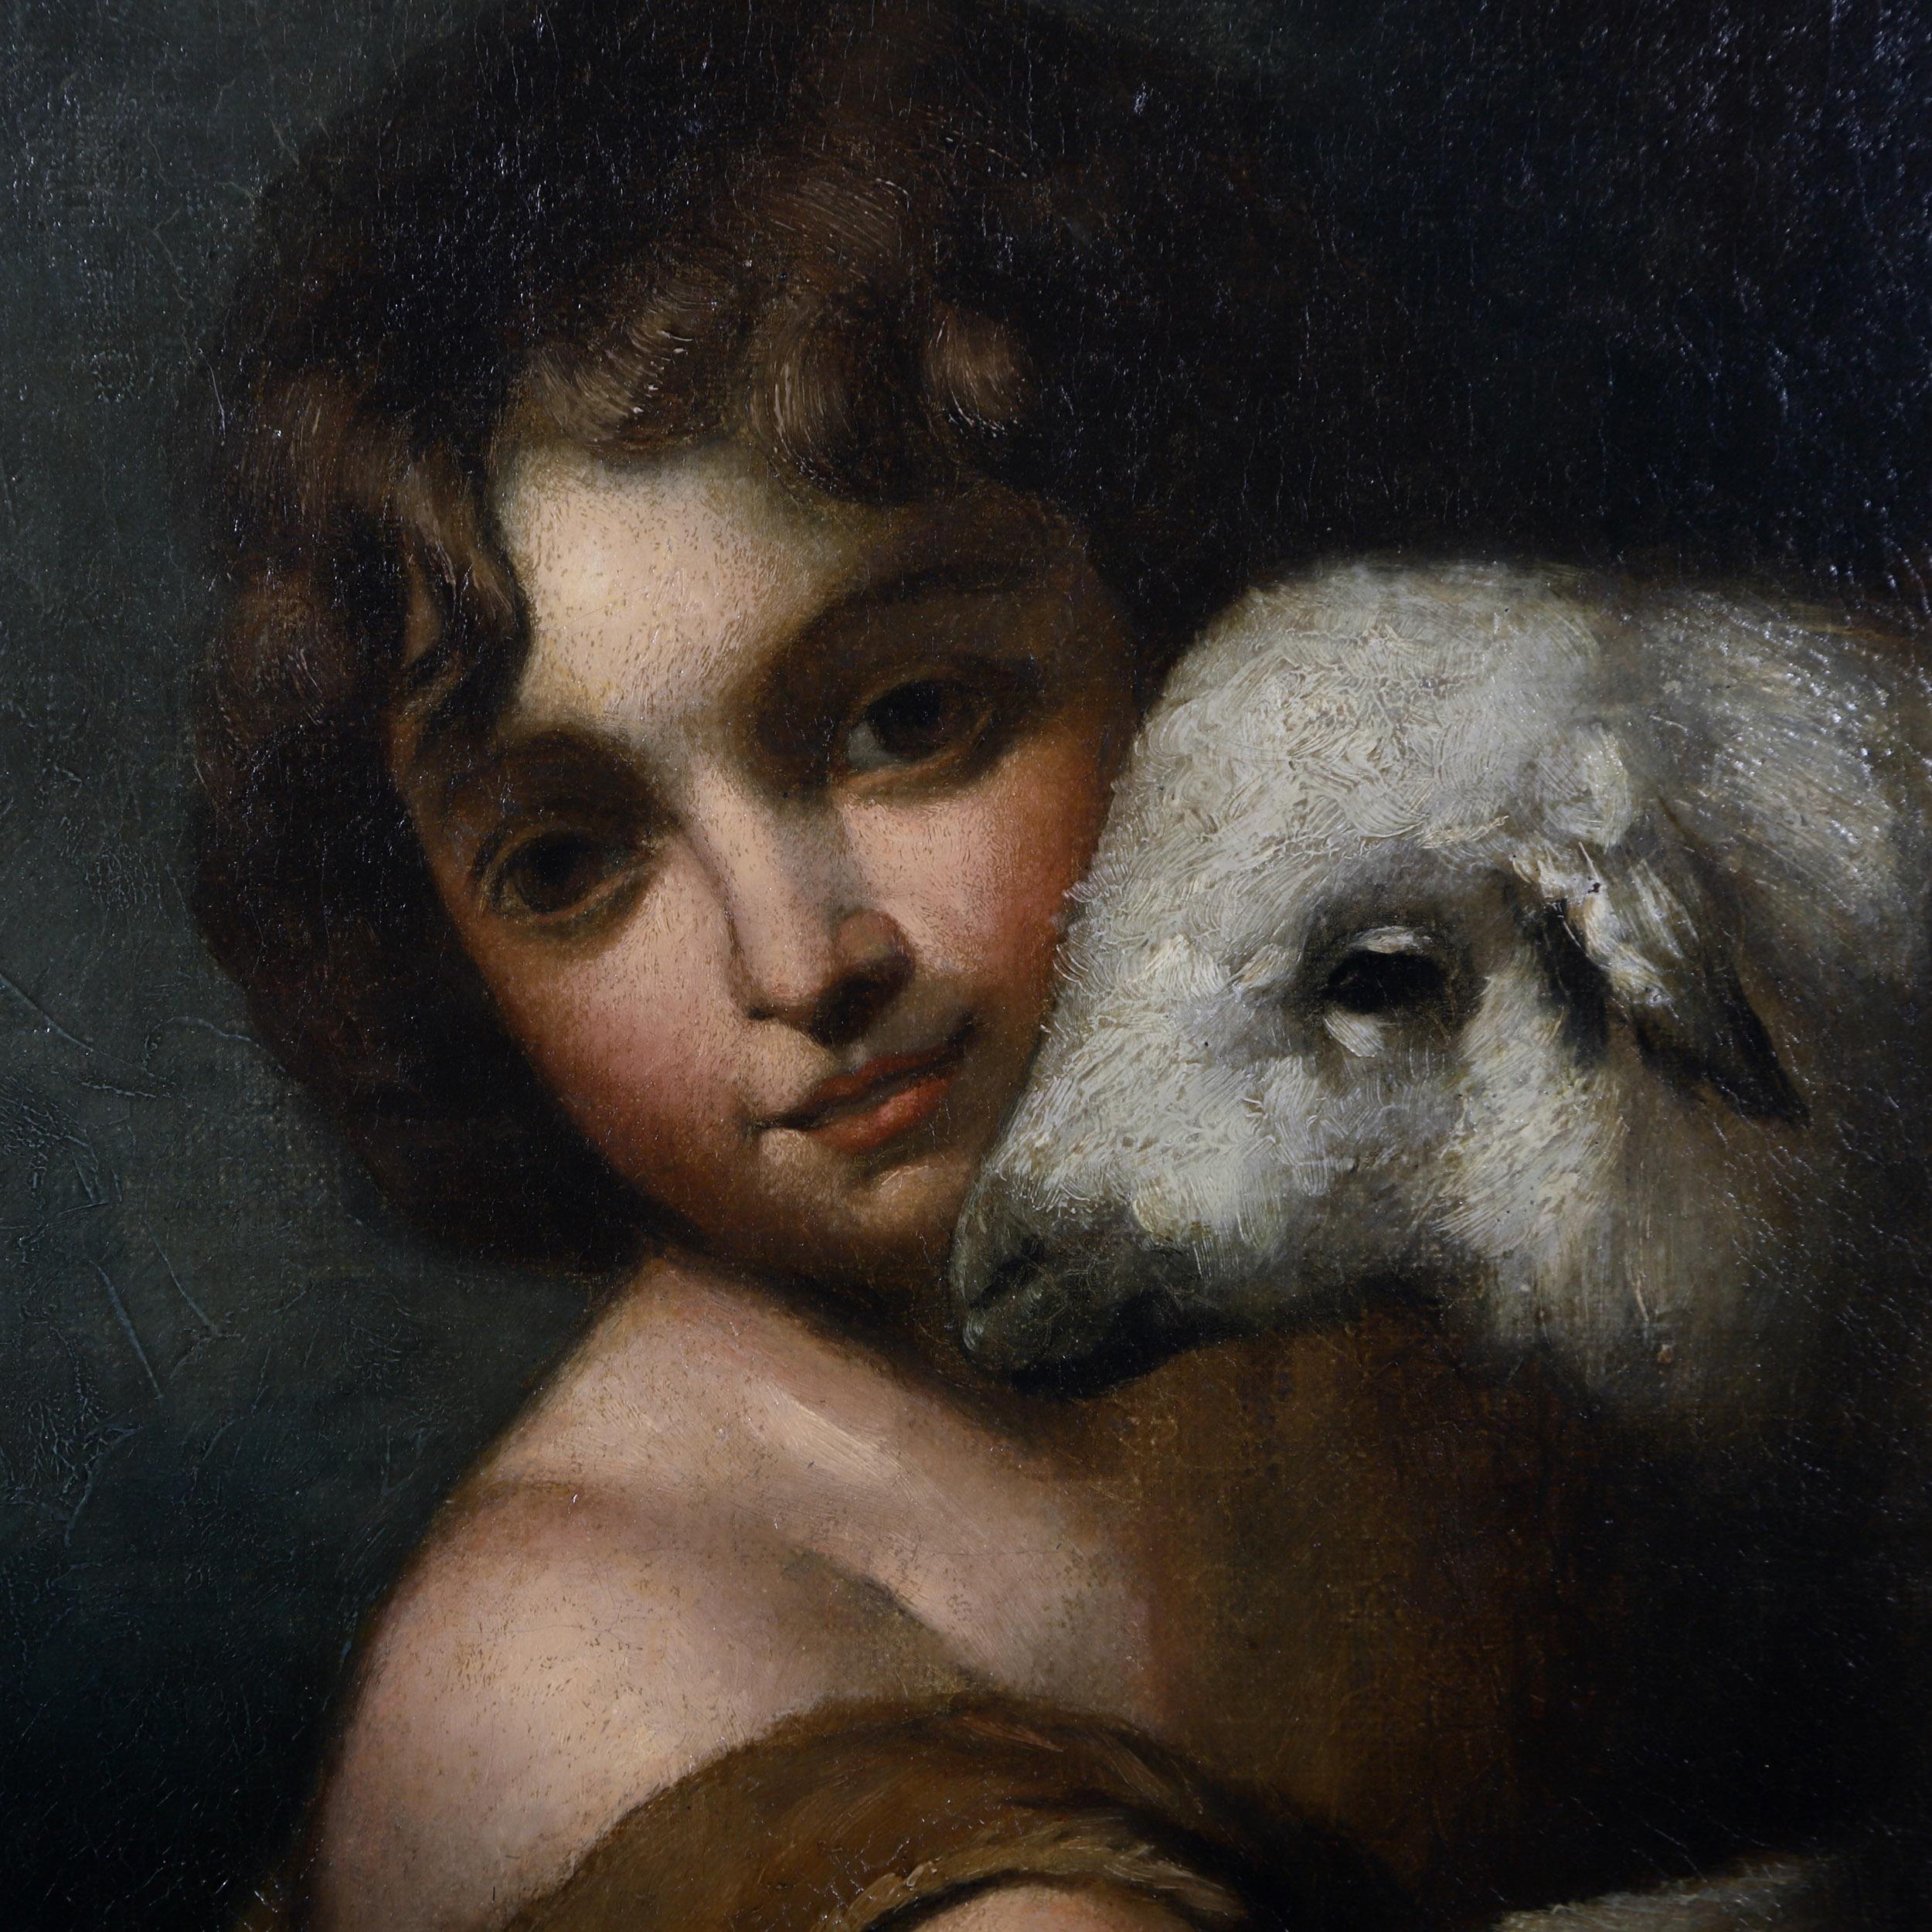 A 19th century oil on canvas of the infant saint john with the lamb, after Bartolomé Esteban Murillo

England, Circa 1860

“According to the Gospel of Matthew, Saint John the Baptist lived in the wilderness, clothed in nothing but camel’s hair